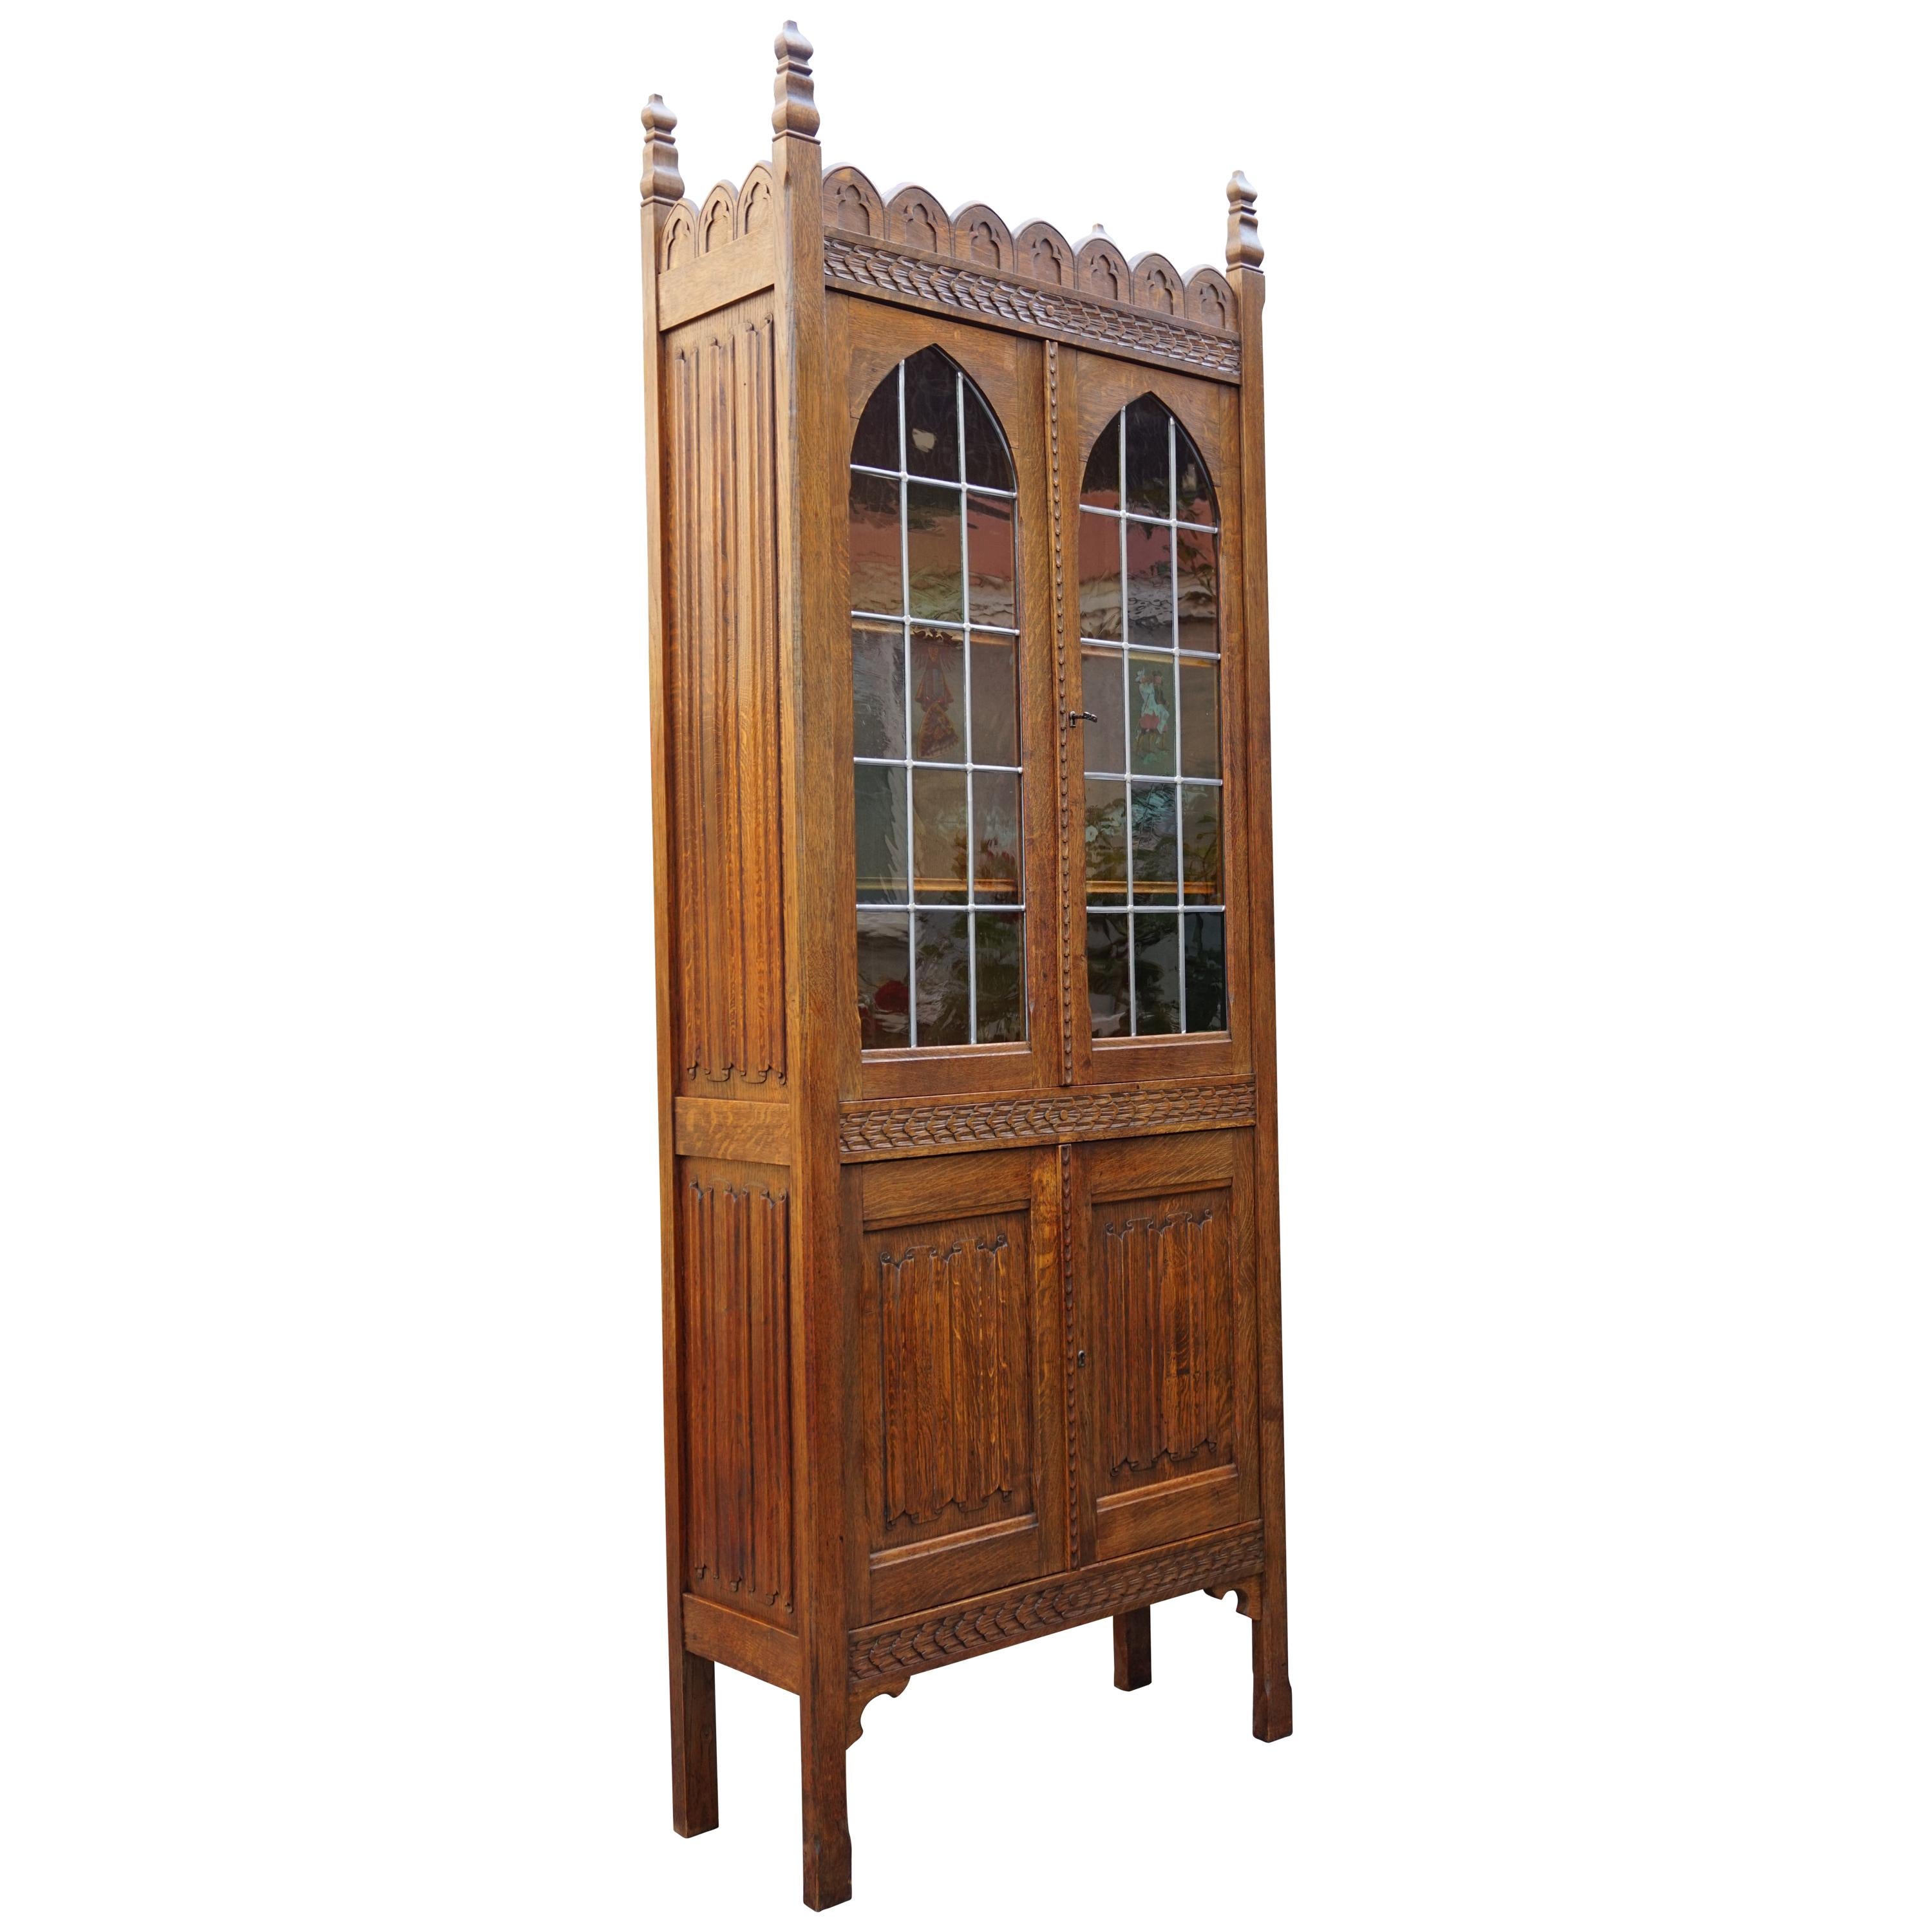 Early 1900s Gothic Revival Tall Bookcase/ Cabinet with Stained Glass Windows